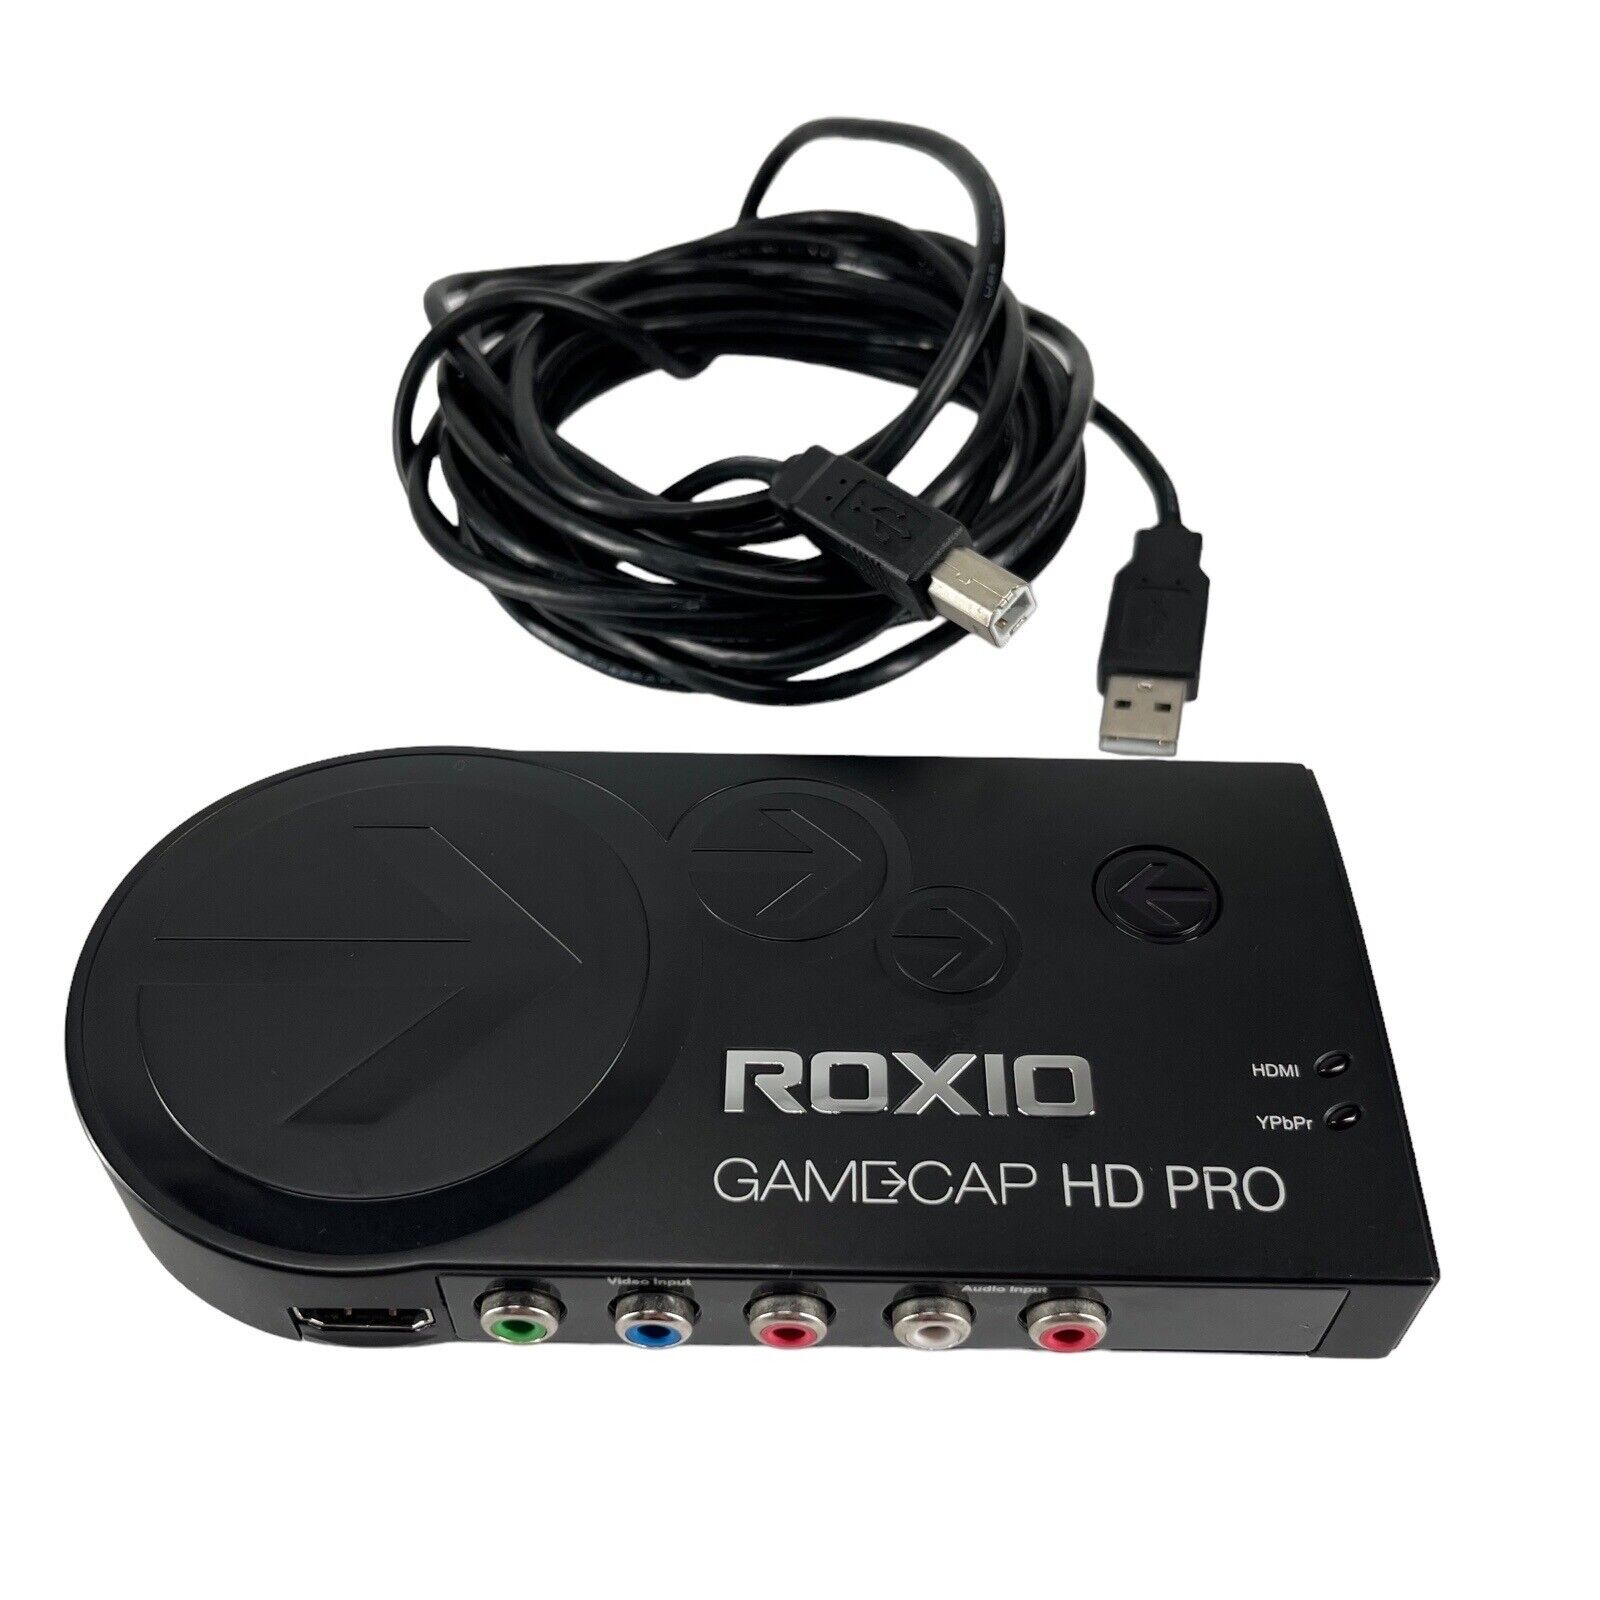 Roxio Gamecap Video Game Capture HD Pro HU338-E With Cable Not Tested